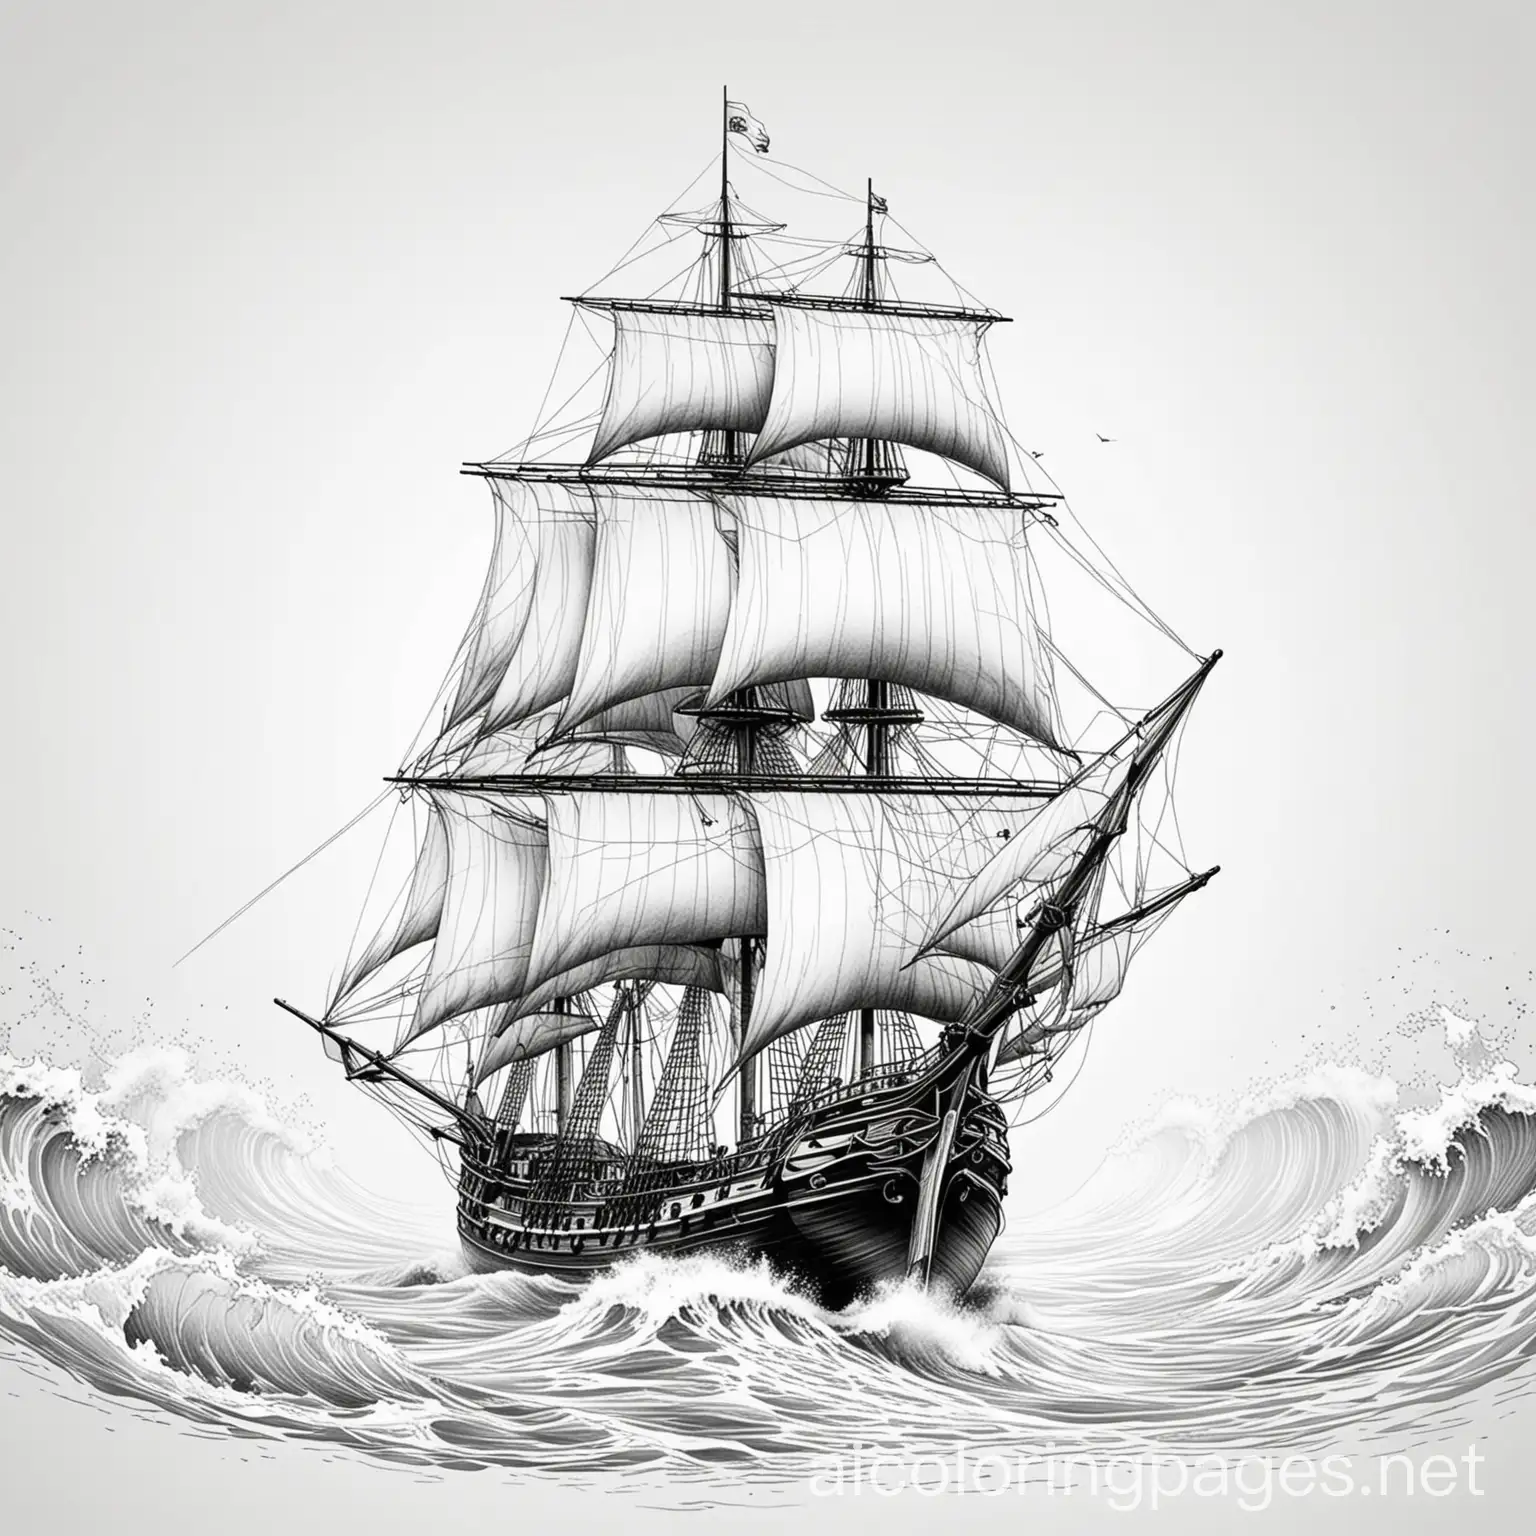 Sailing-Ship-Surfing-the-Seas-Coloring-Page-Line-Art-Illustration-with-Ample-White-Space